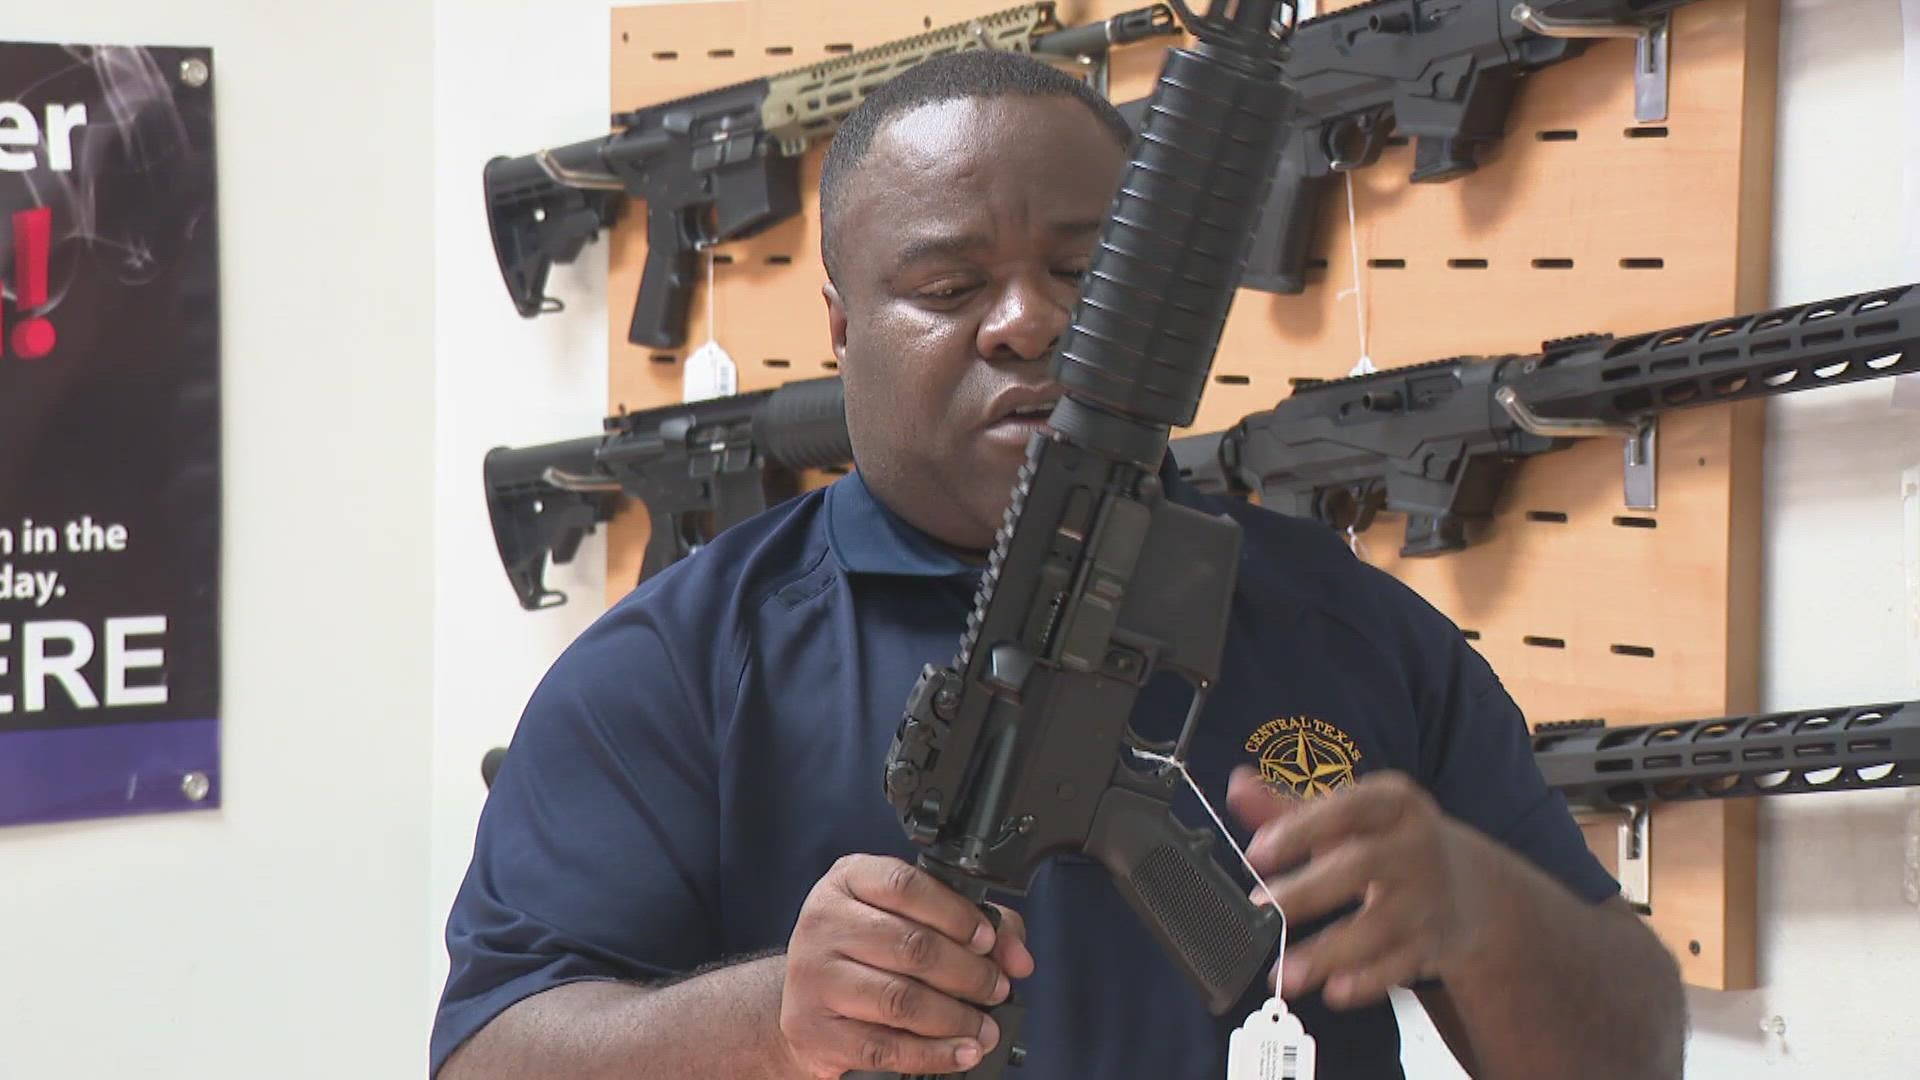 KVUE's Matt Fernandez speaks with a gun expert to learn more about the AR-15 style rifle amid calls for a ban on assault weapons.